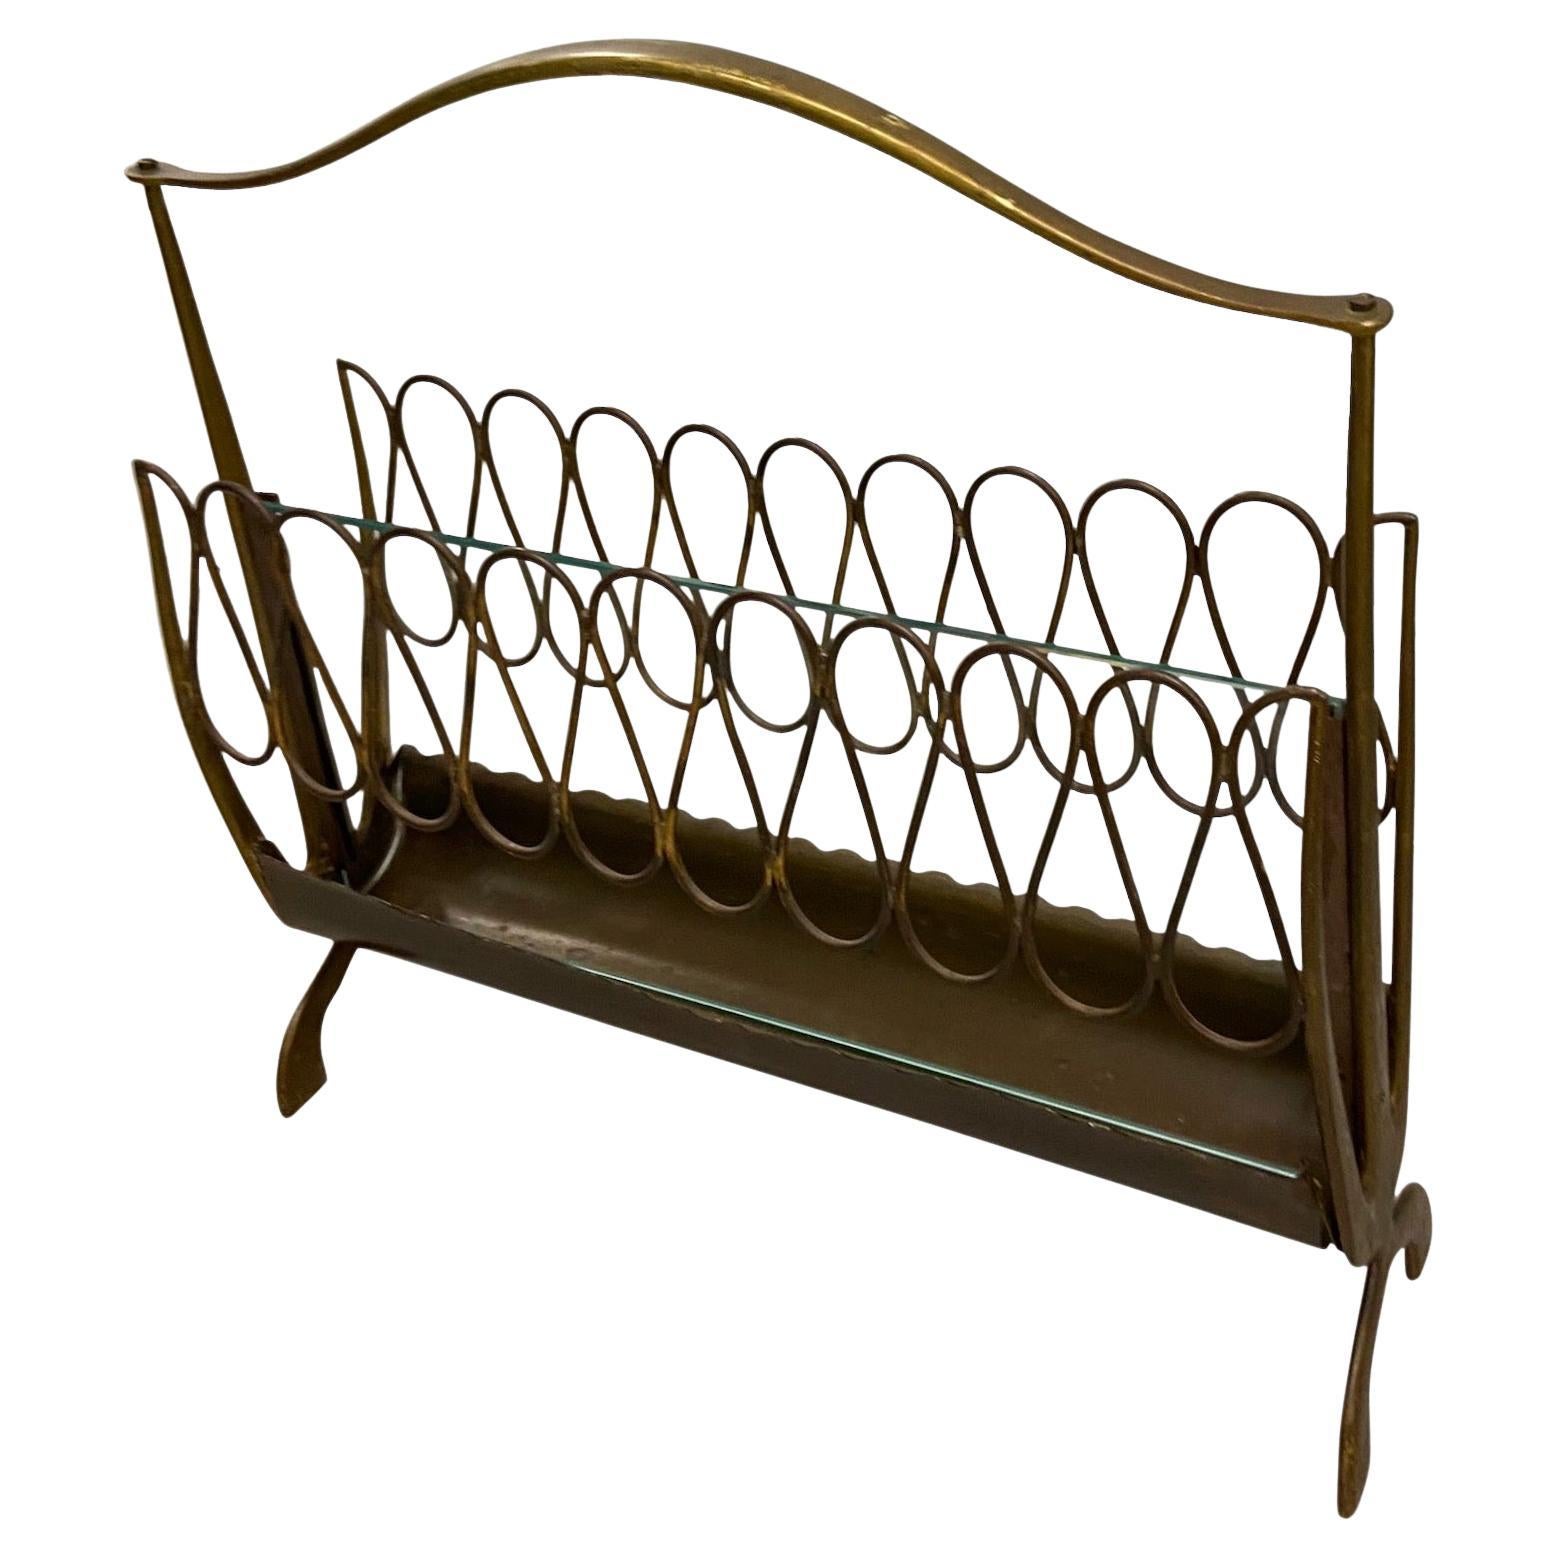 Midcentury Magazine Rack in the Style of Gio Ponti, Brass and Glass